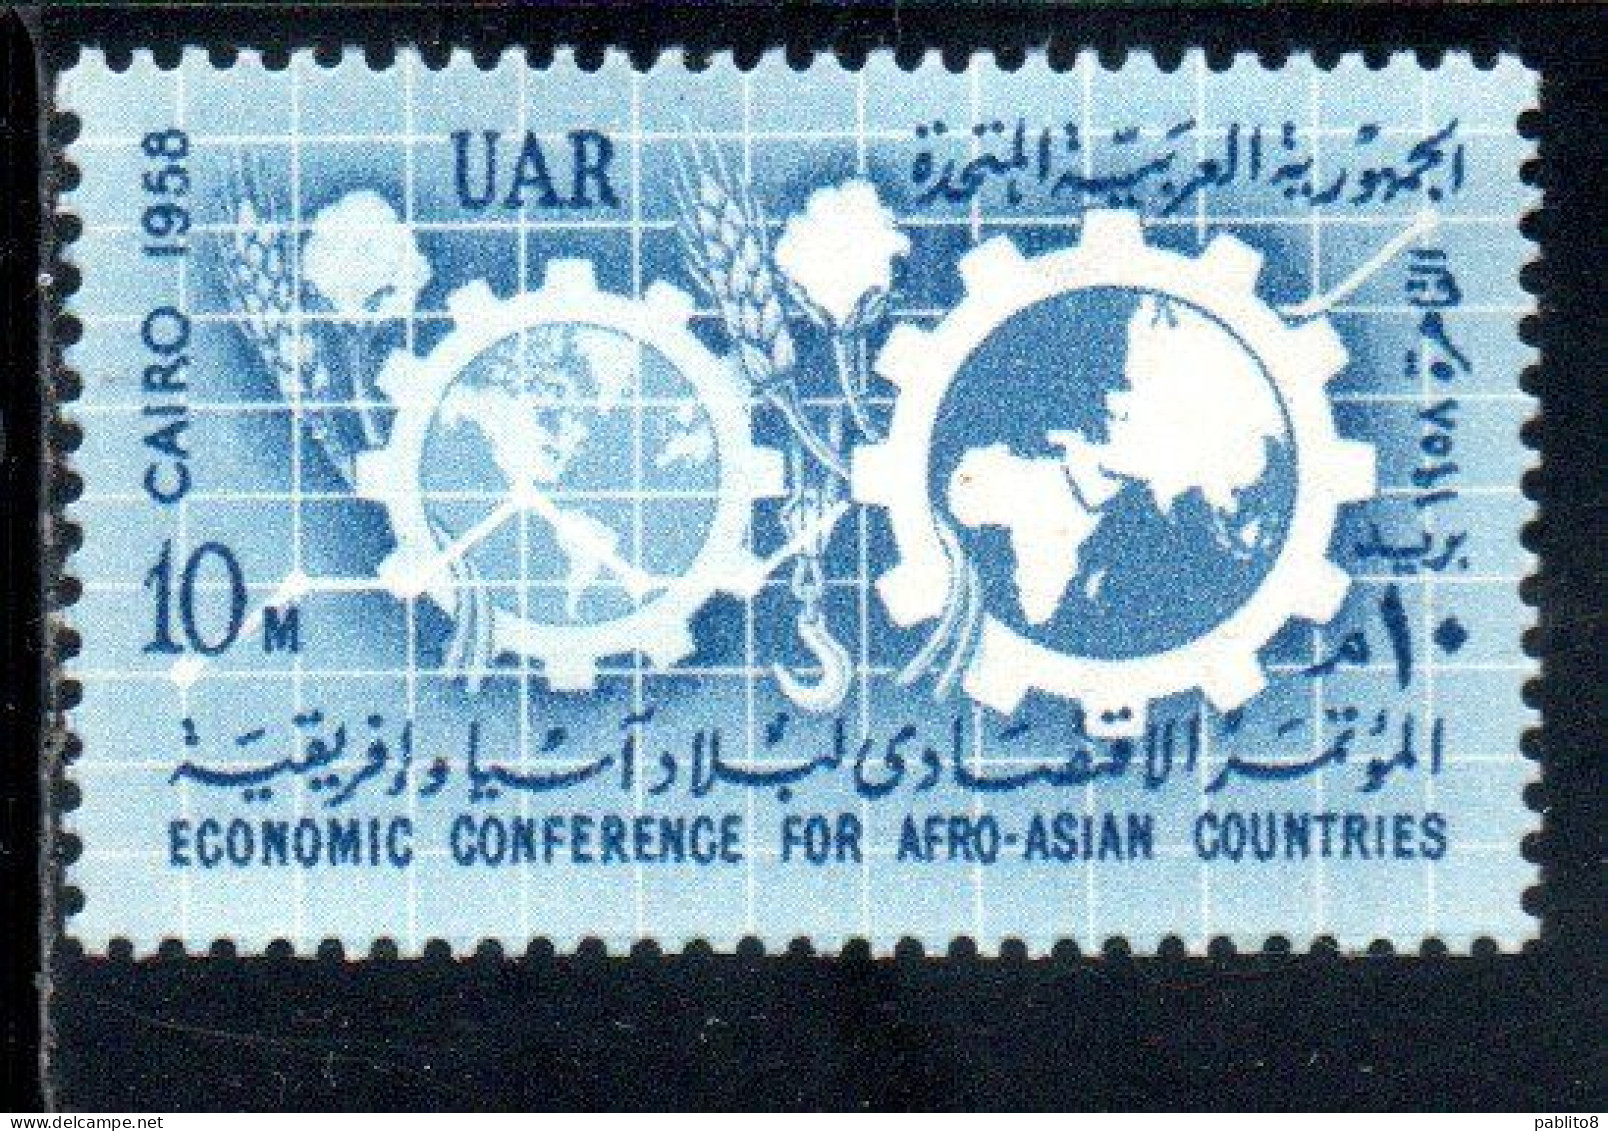 UAR EGYPT EGITTO 1958 ECONOMIC CONFERENCE OF AFRO-ASIAN COUNTRIES CAIRO MAPS AND COGWHEELS 10m MNH - Unused Stamps